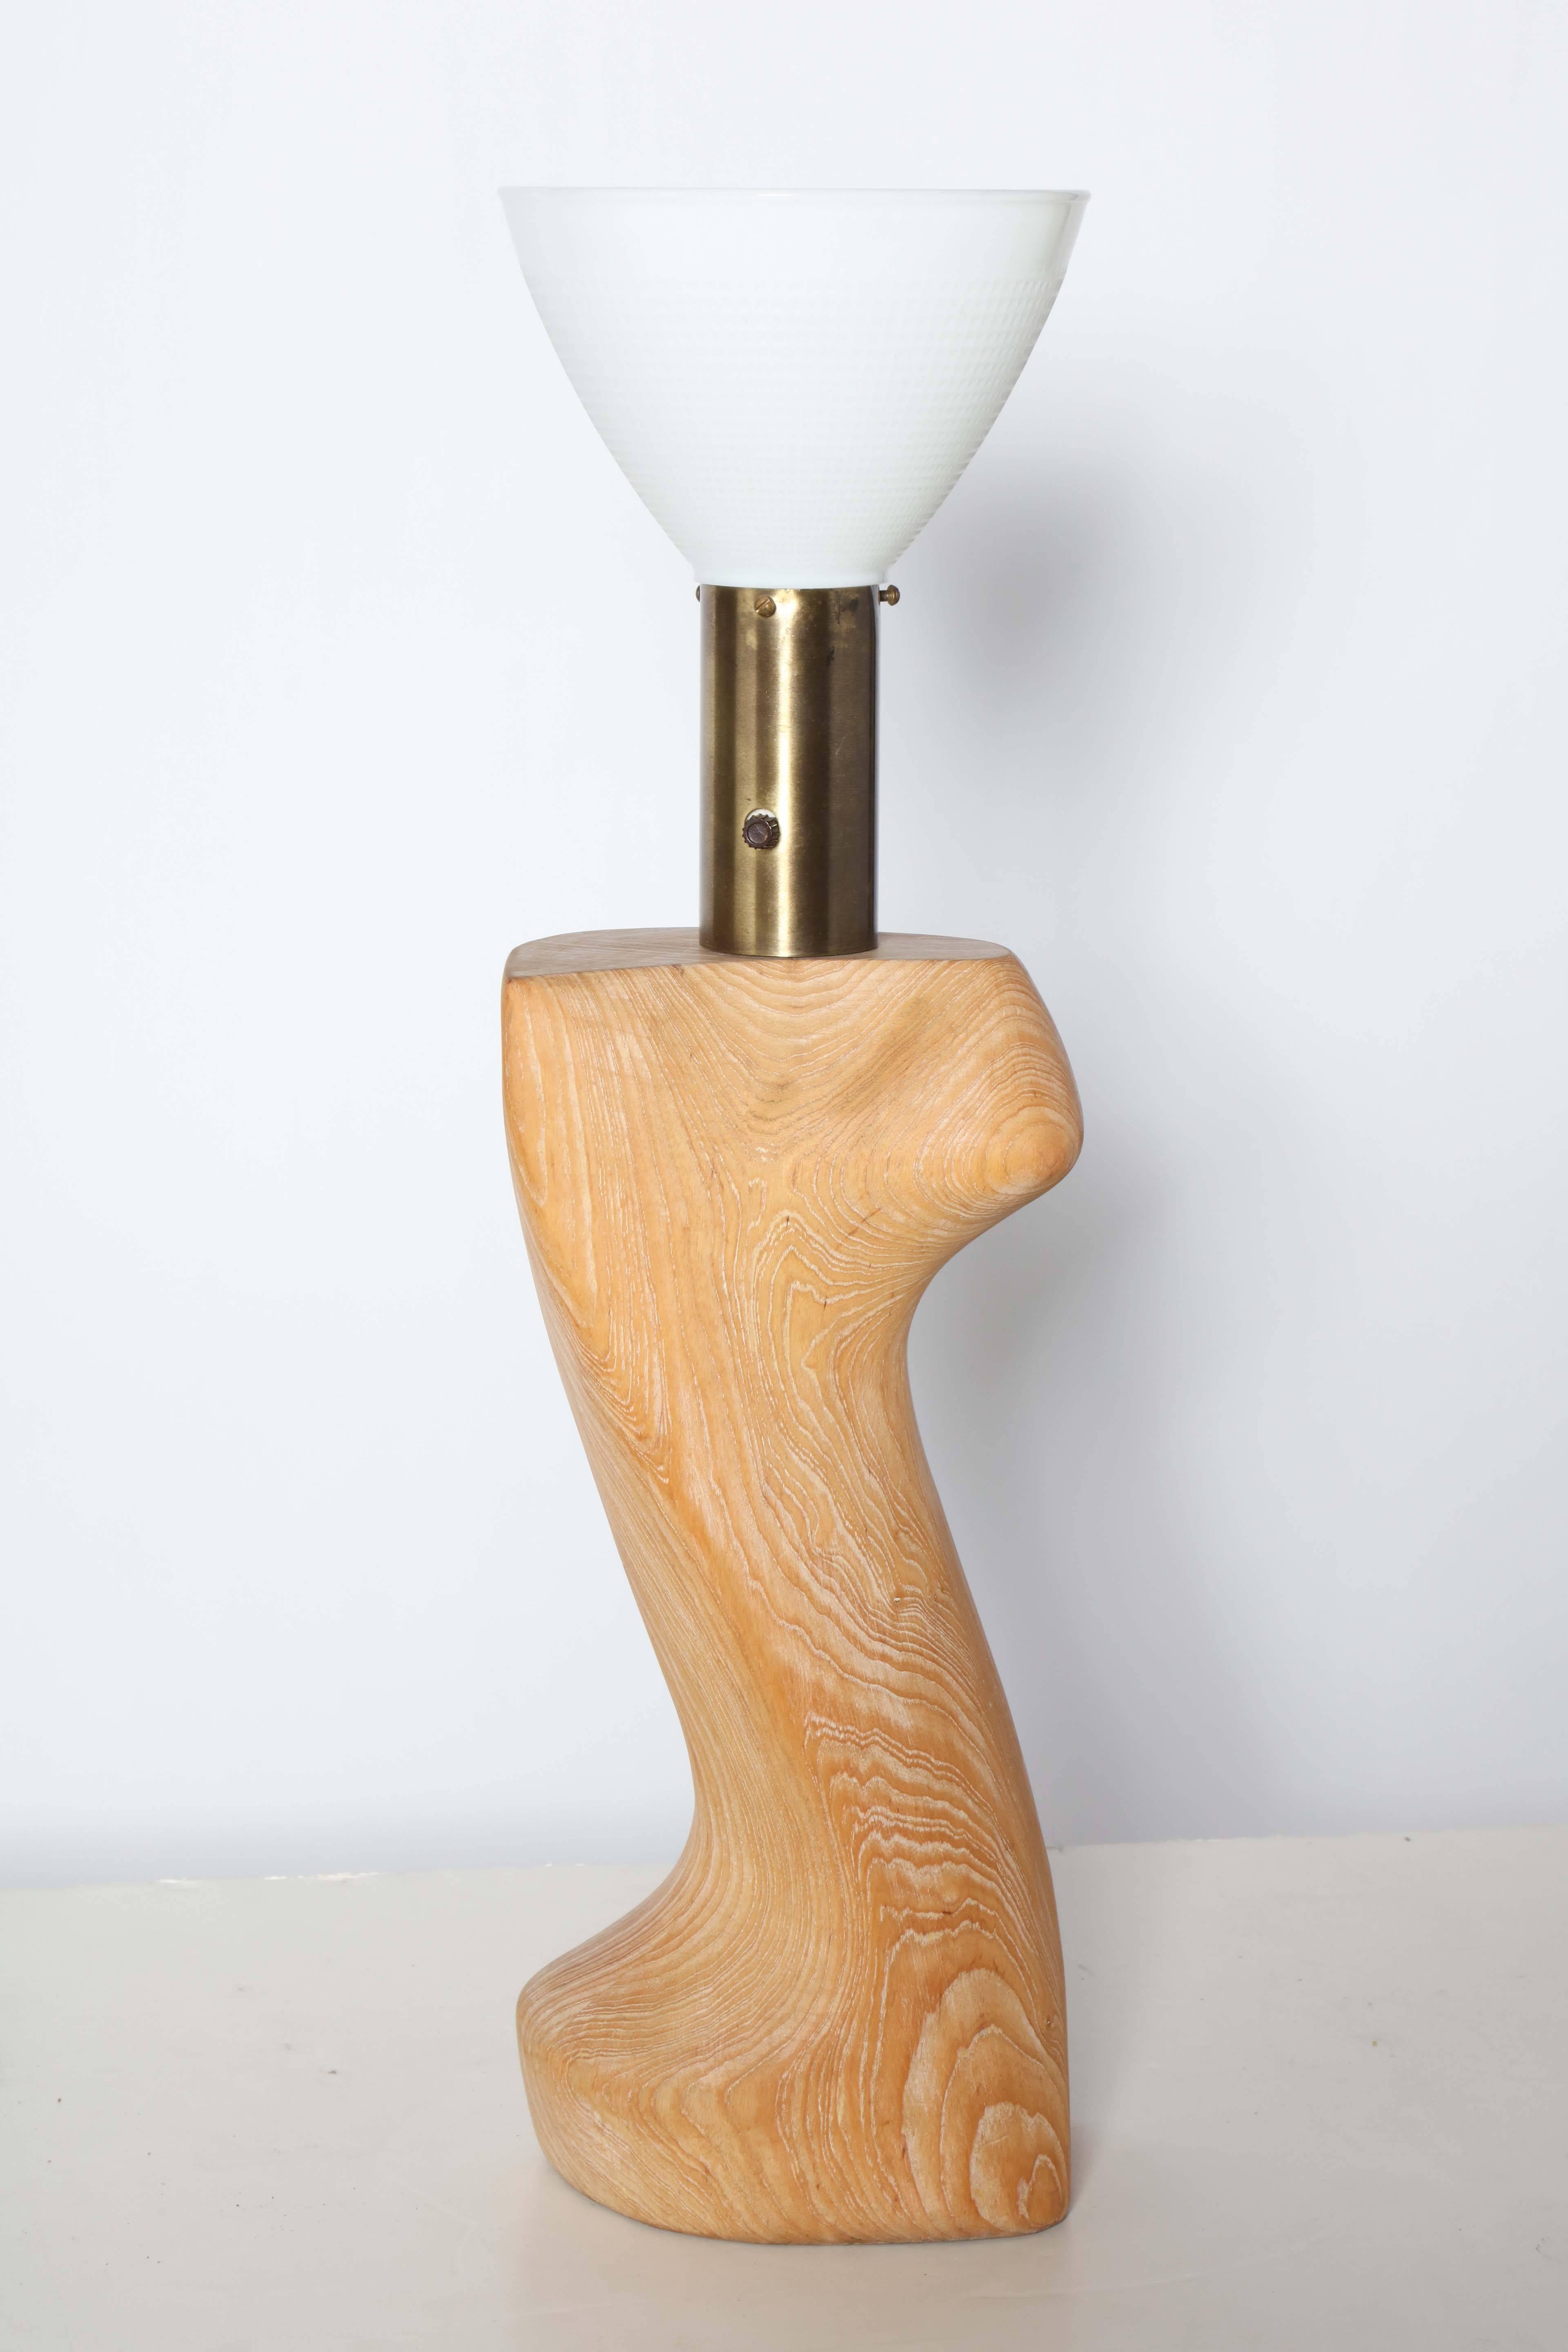 Large Organic Modern Yasha Heifetz and Light House Lamp and Lamp Shade Co. of California solid limed ash, brass table lamp with white glass shade. Featuring lightly cerused and slightly biomorphic carved ash form with wide cylindrical brass neck and